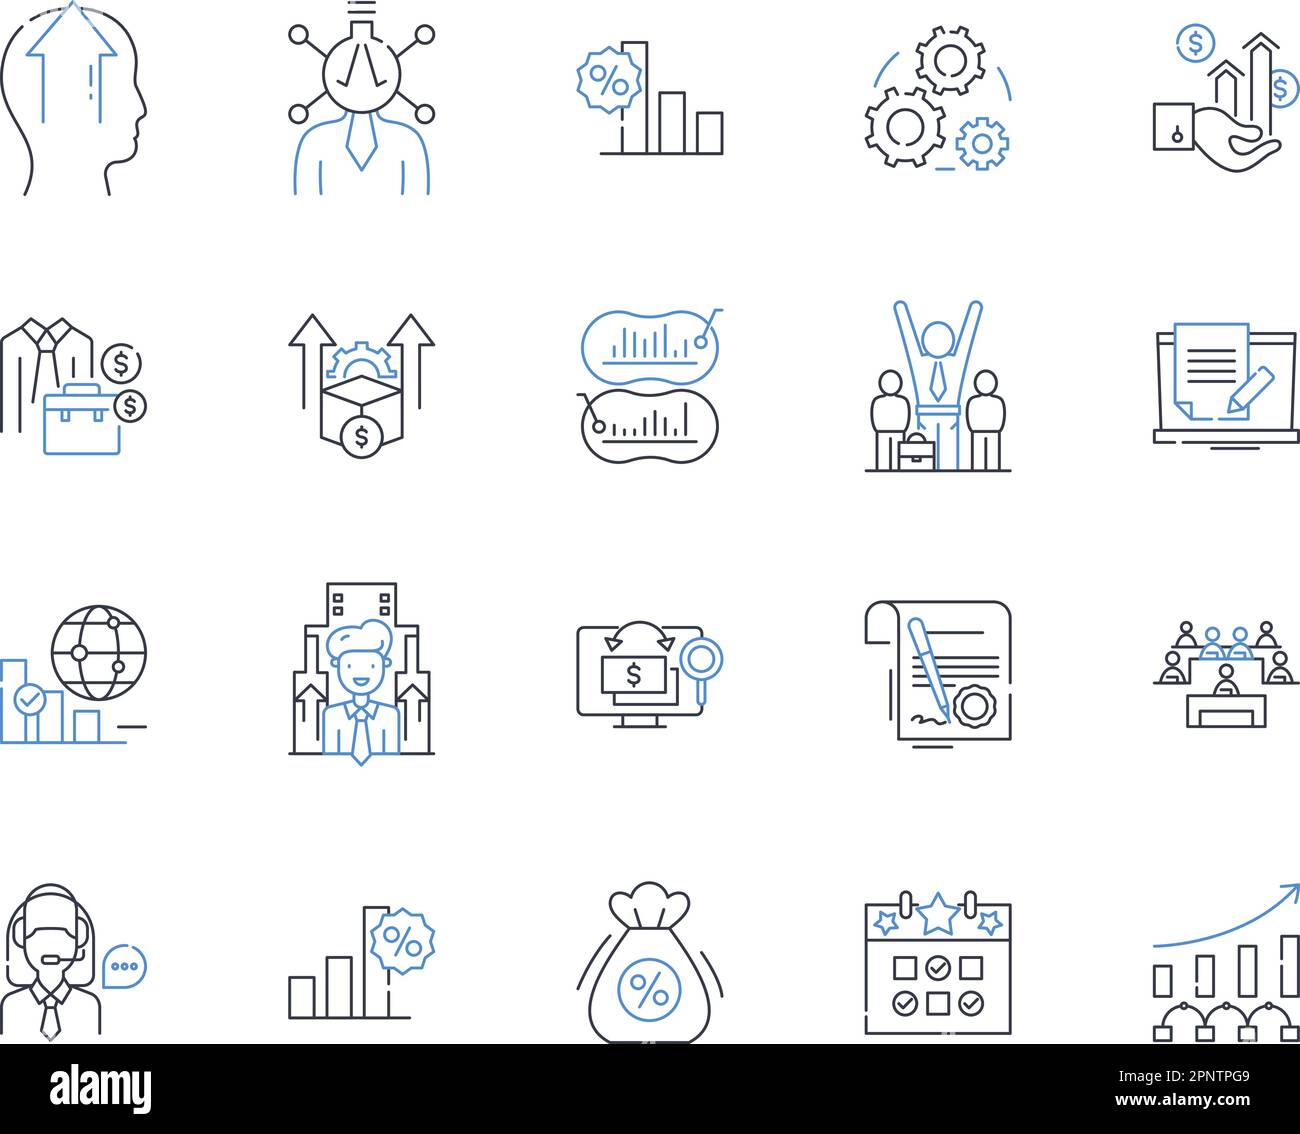 Pricing analysis line icons collection. Cost, Profitability, Revenue, Margins, Pricing strategy, Competition, Price elasticity vector and linear Stock Vector